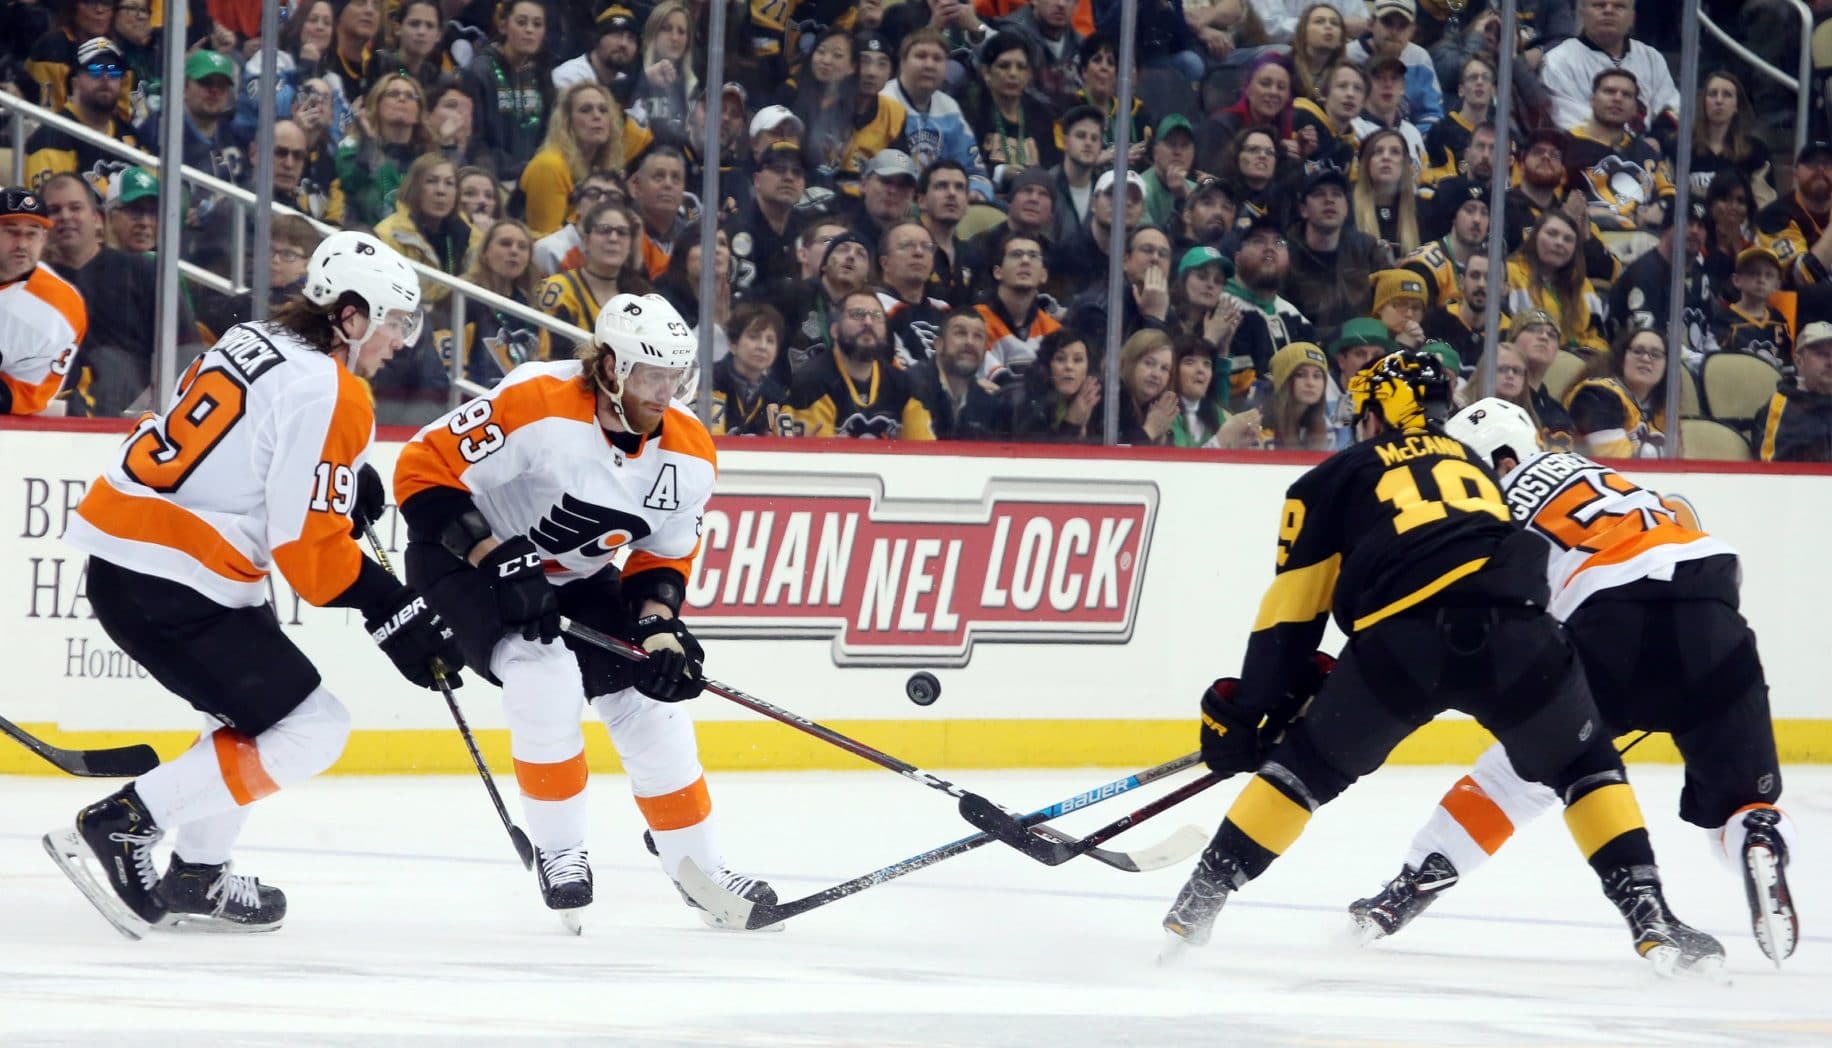 PA Sportsbooks Are Running a Ton of Betting Boosts on Flyers vs. Penguins Tonight